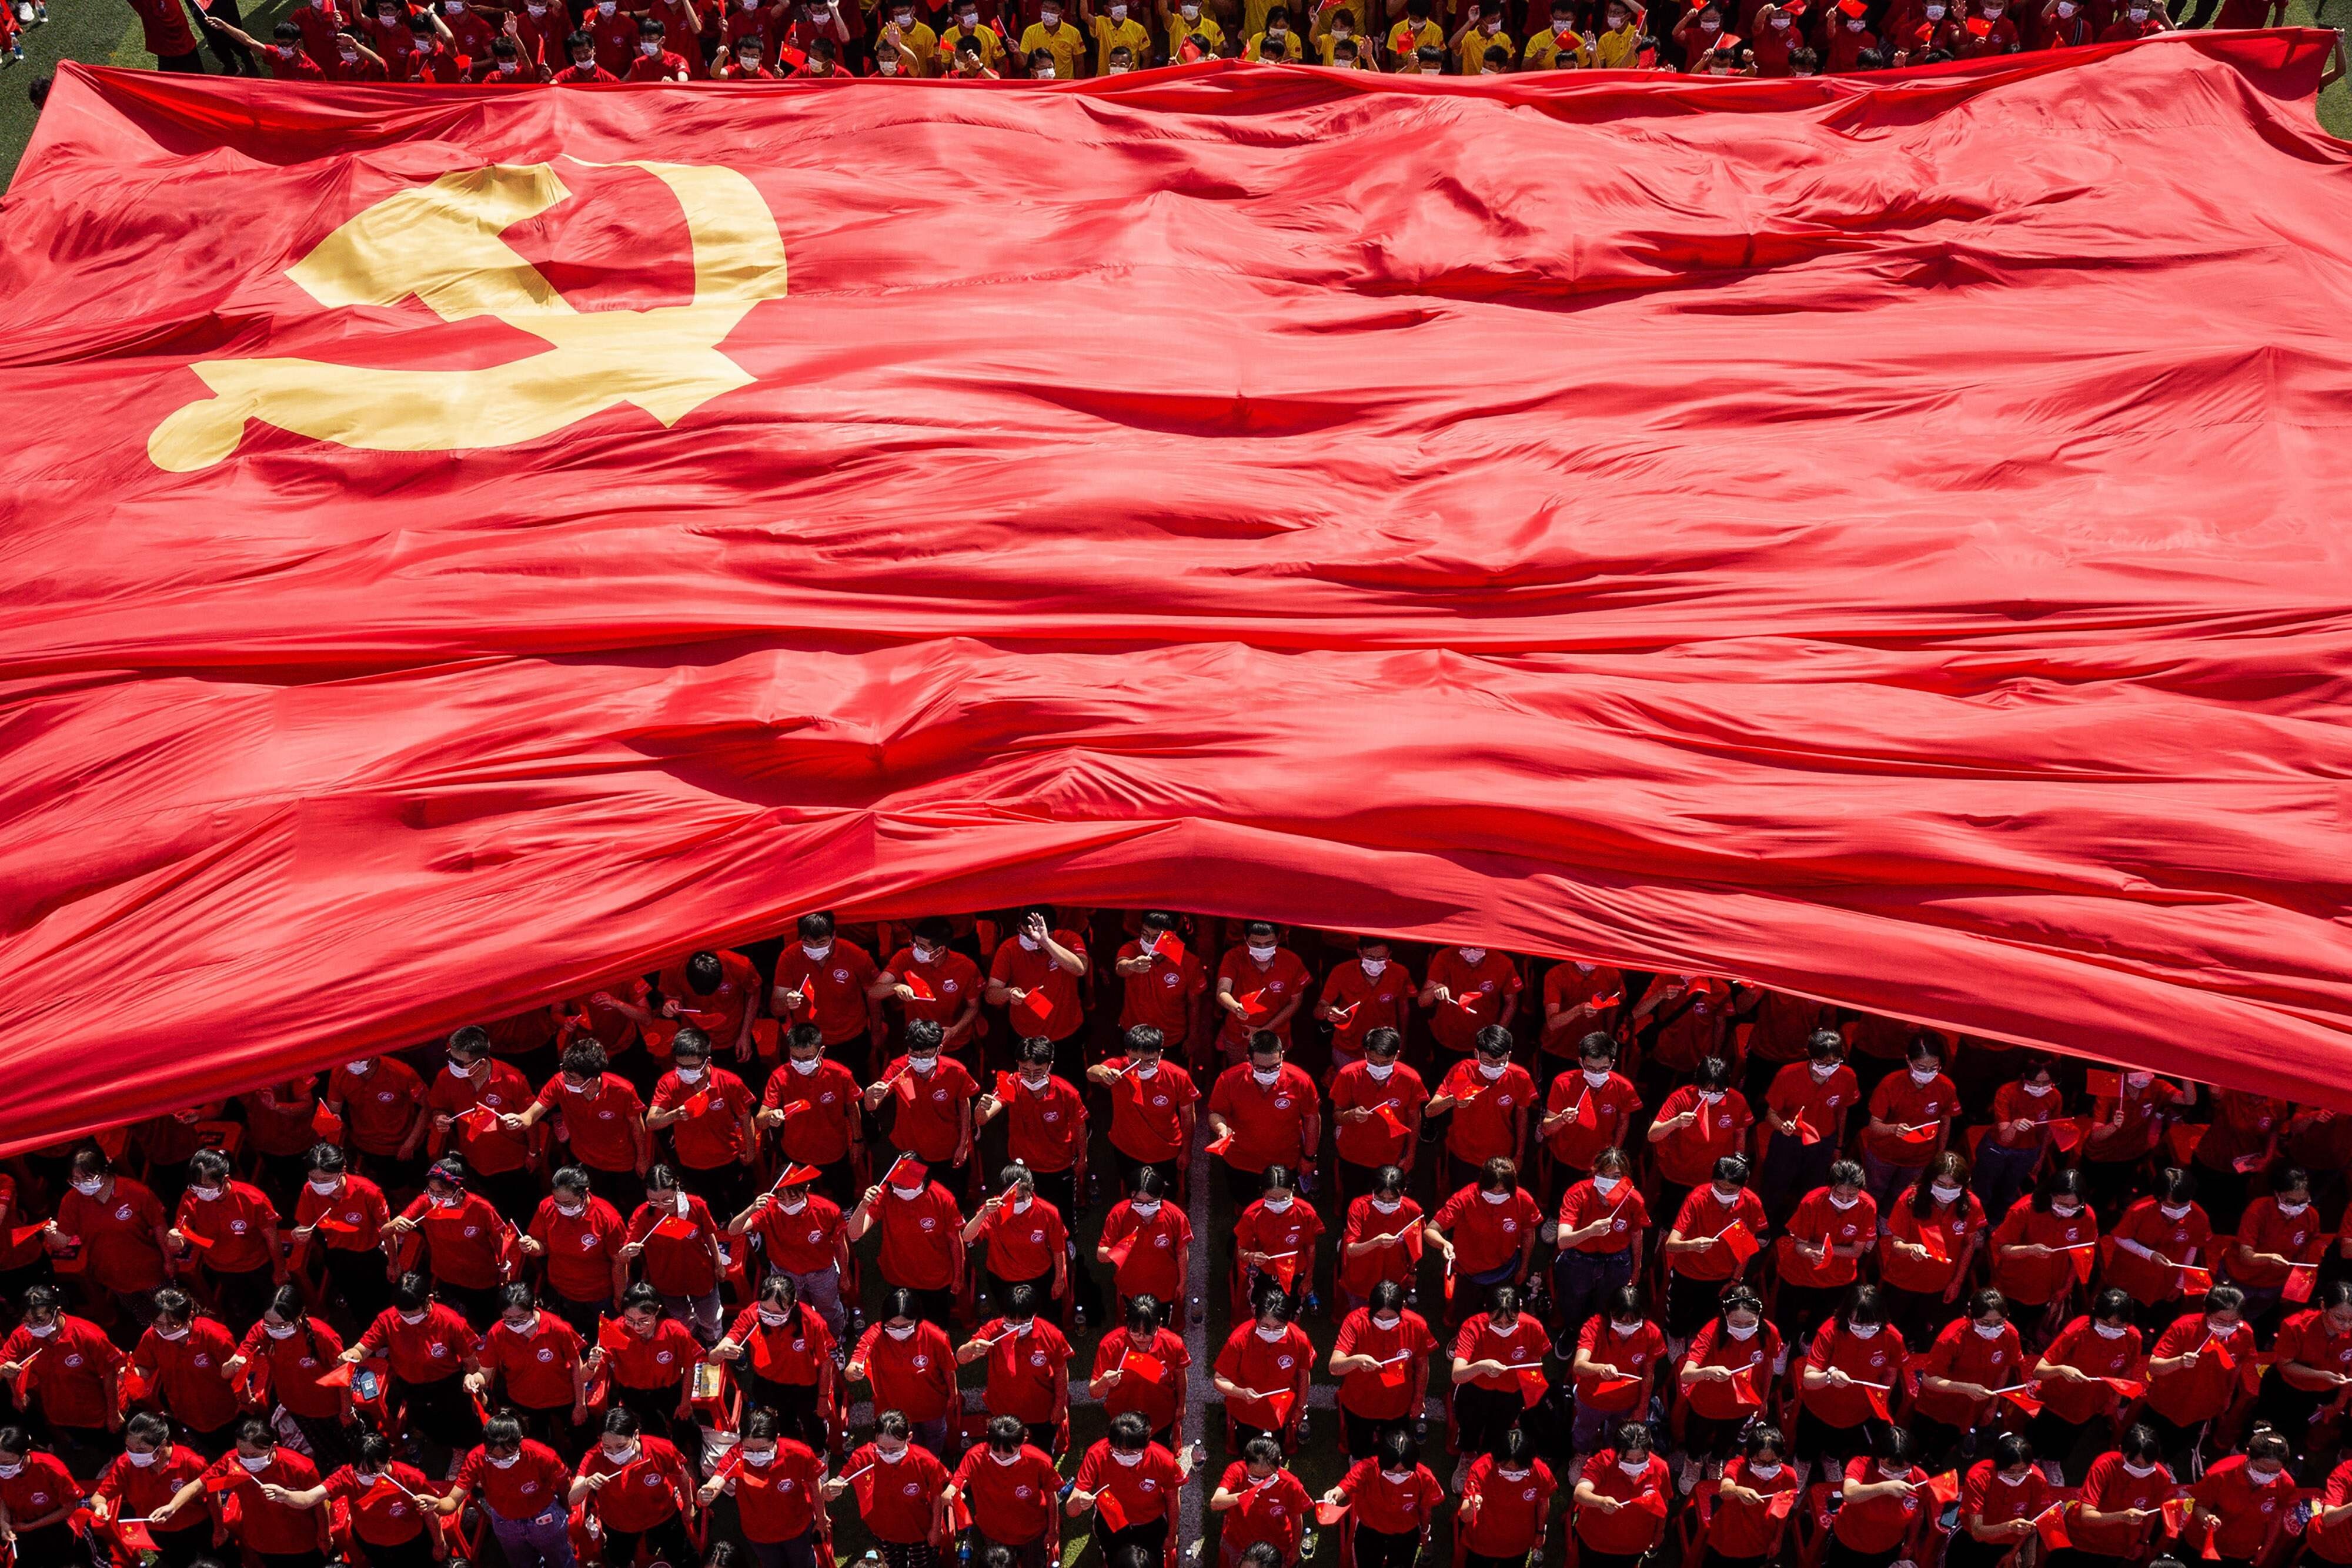 University students in Wuhan display the flag of the Communist Party of China to mark its 100th anniversary. Photo: AFP